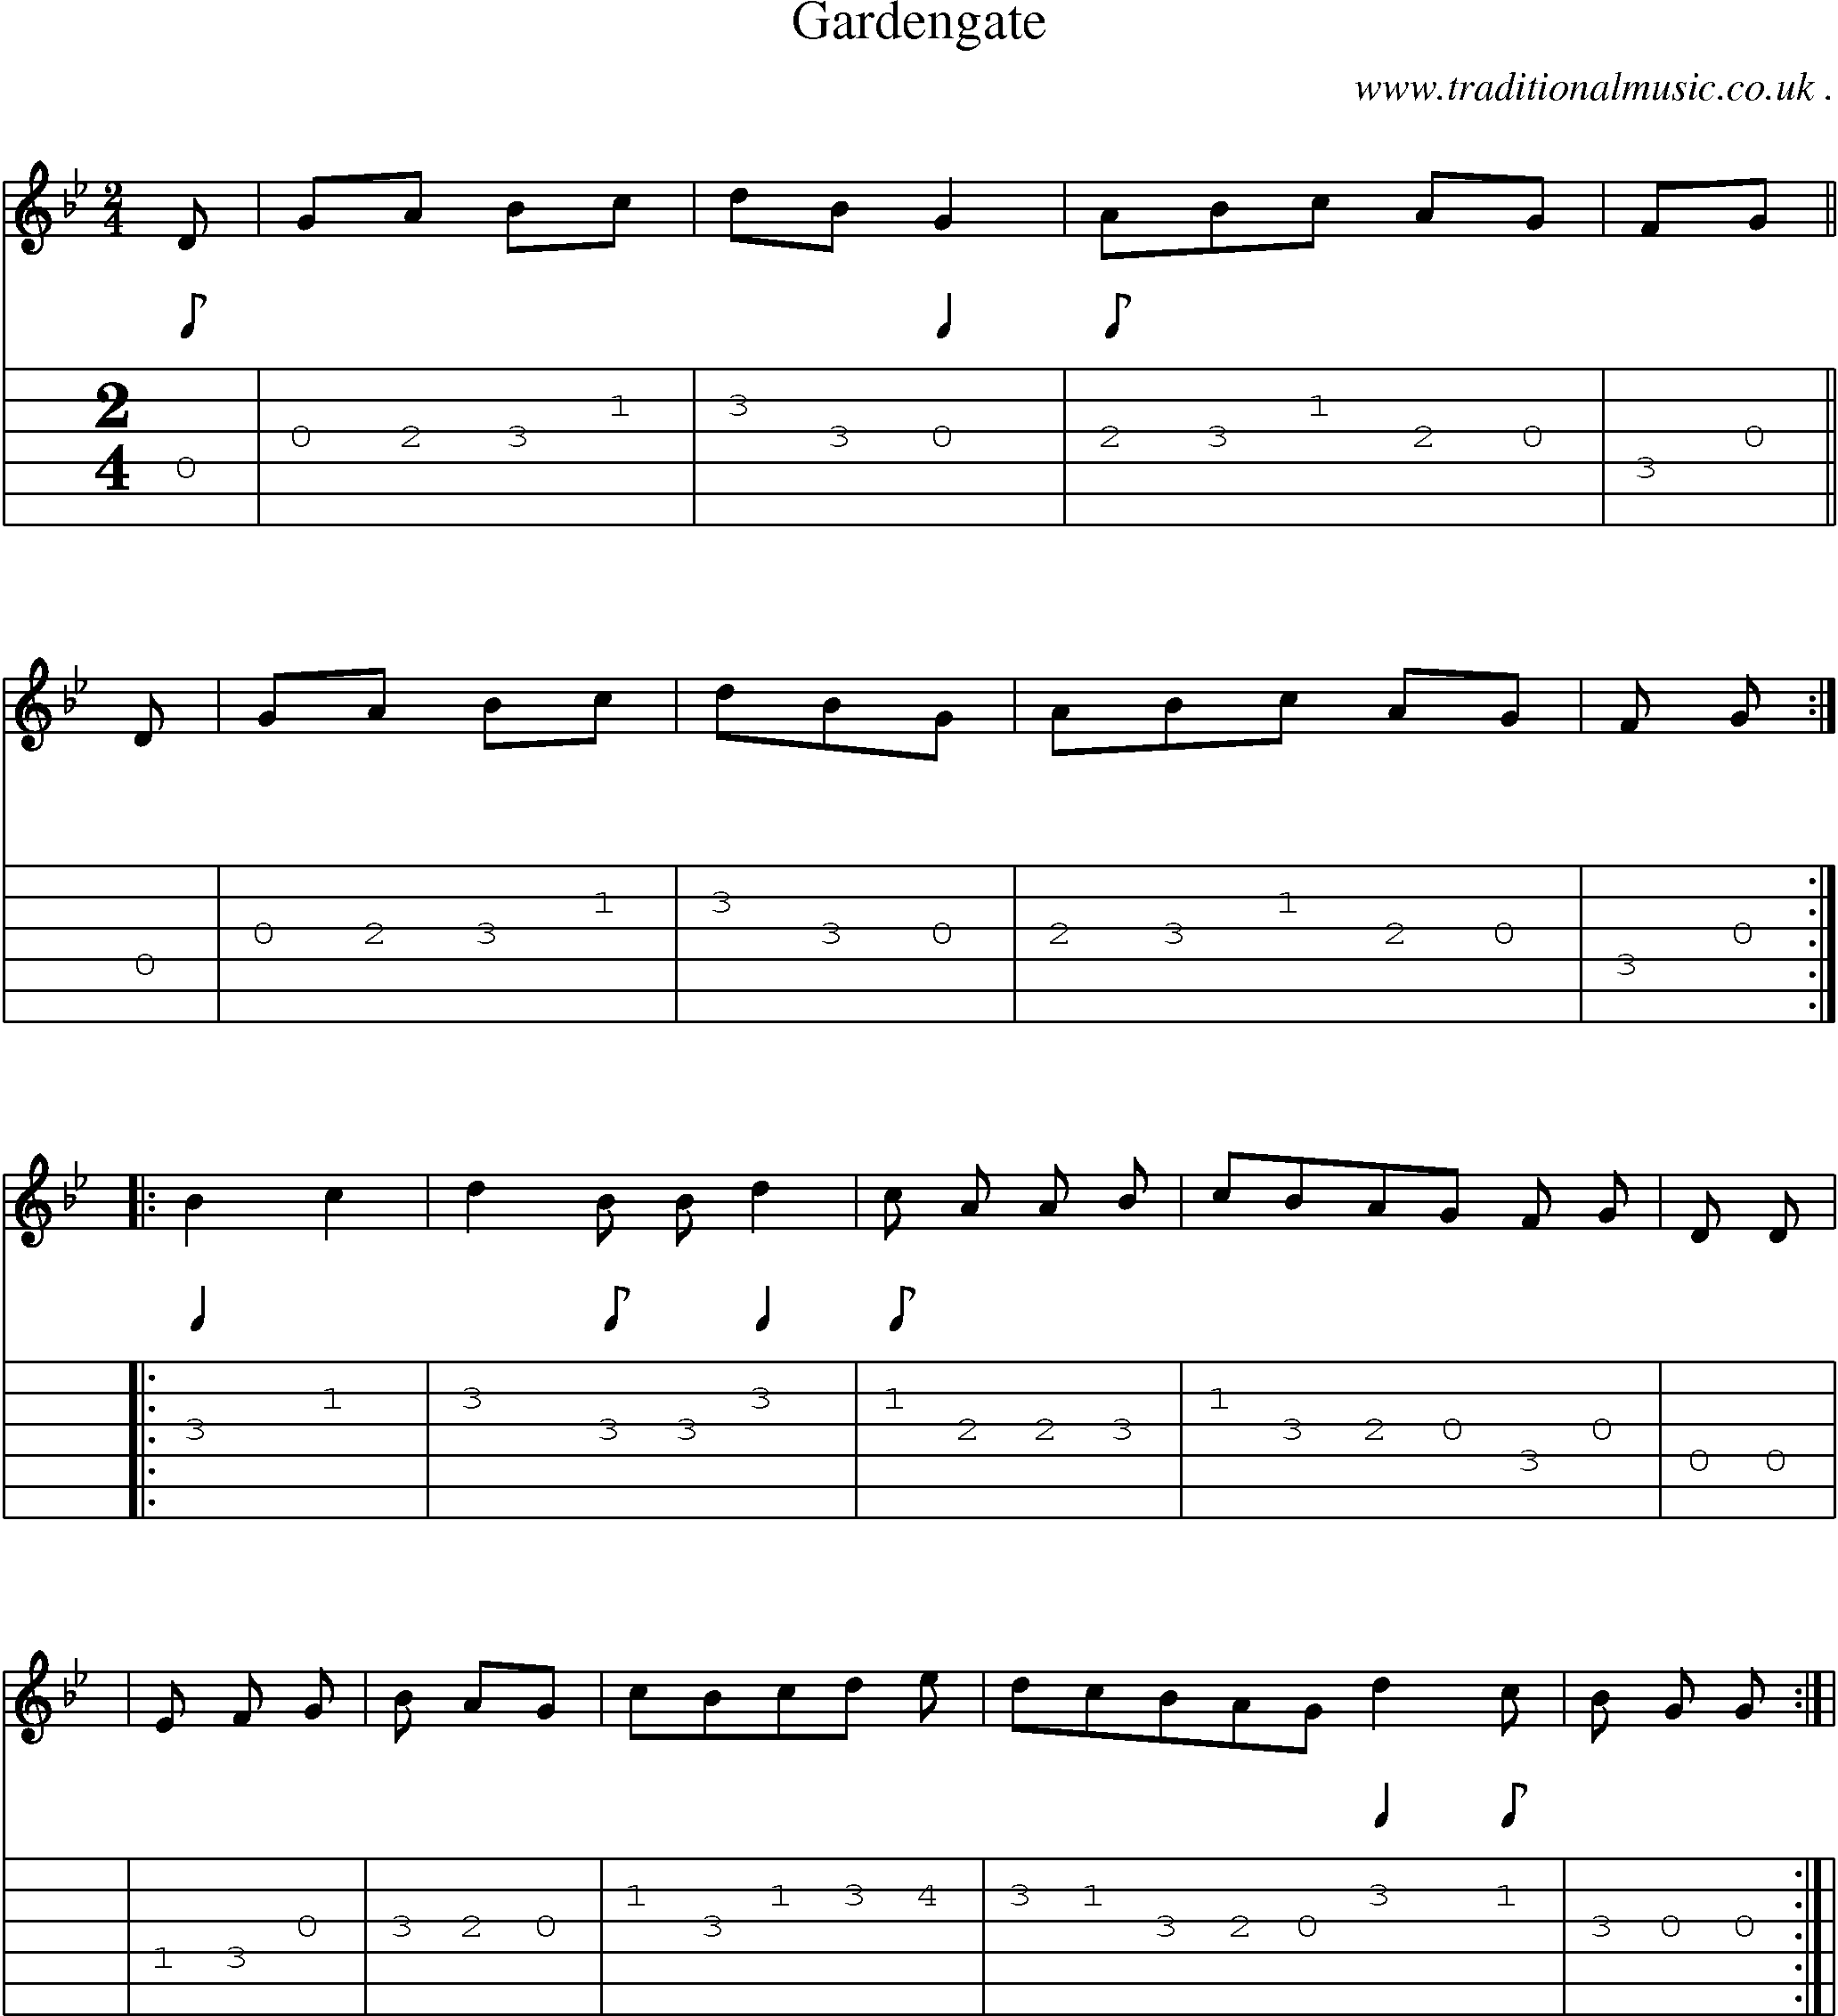 Sheet-Music and Guitar Tabs for Gardengate